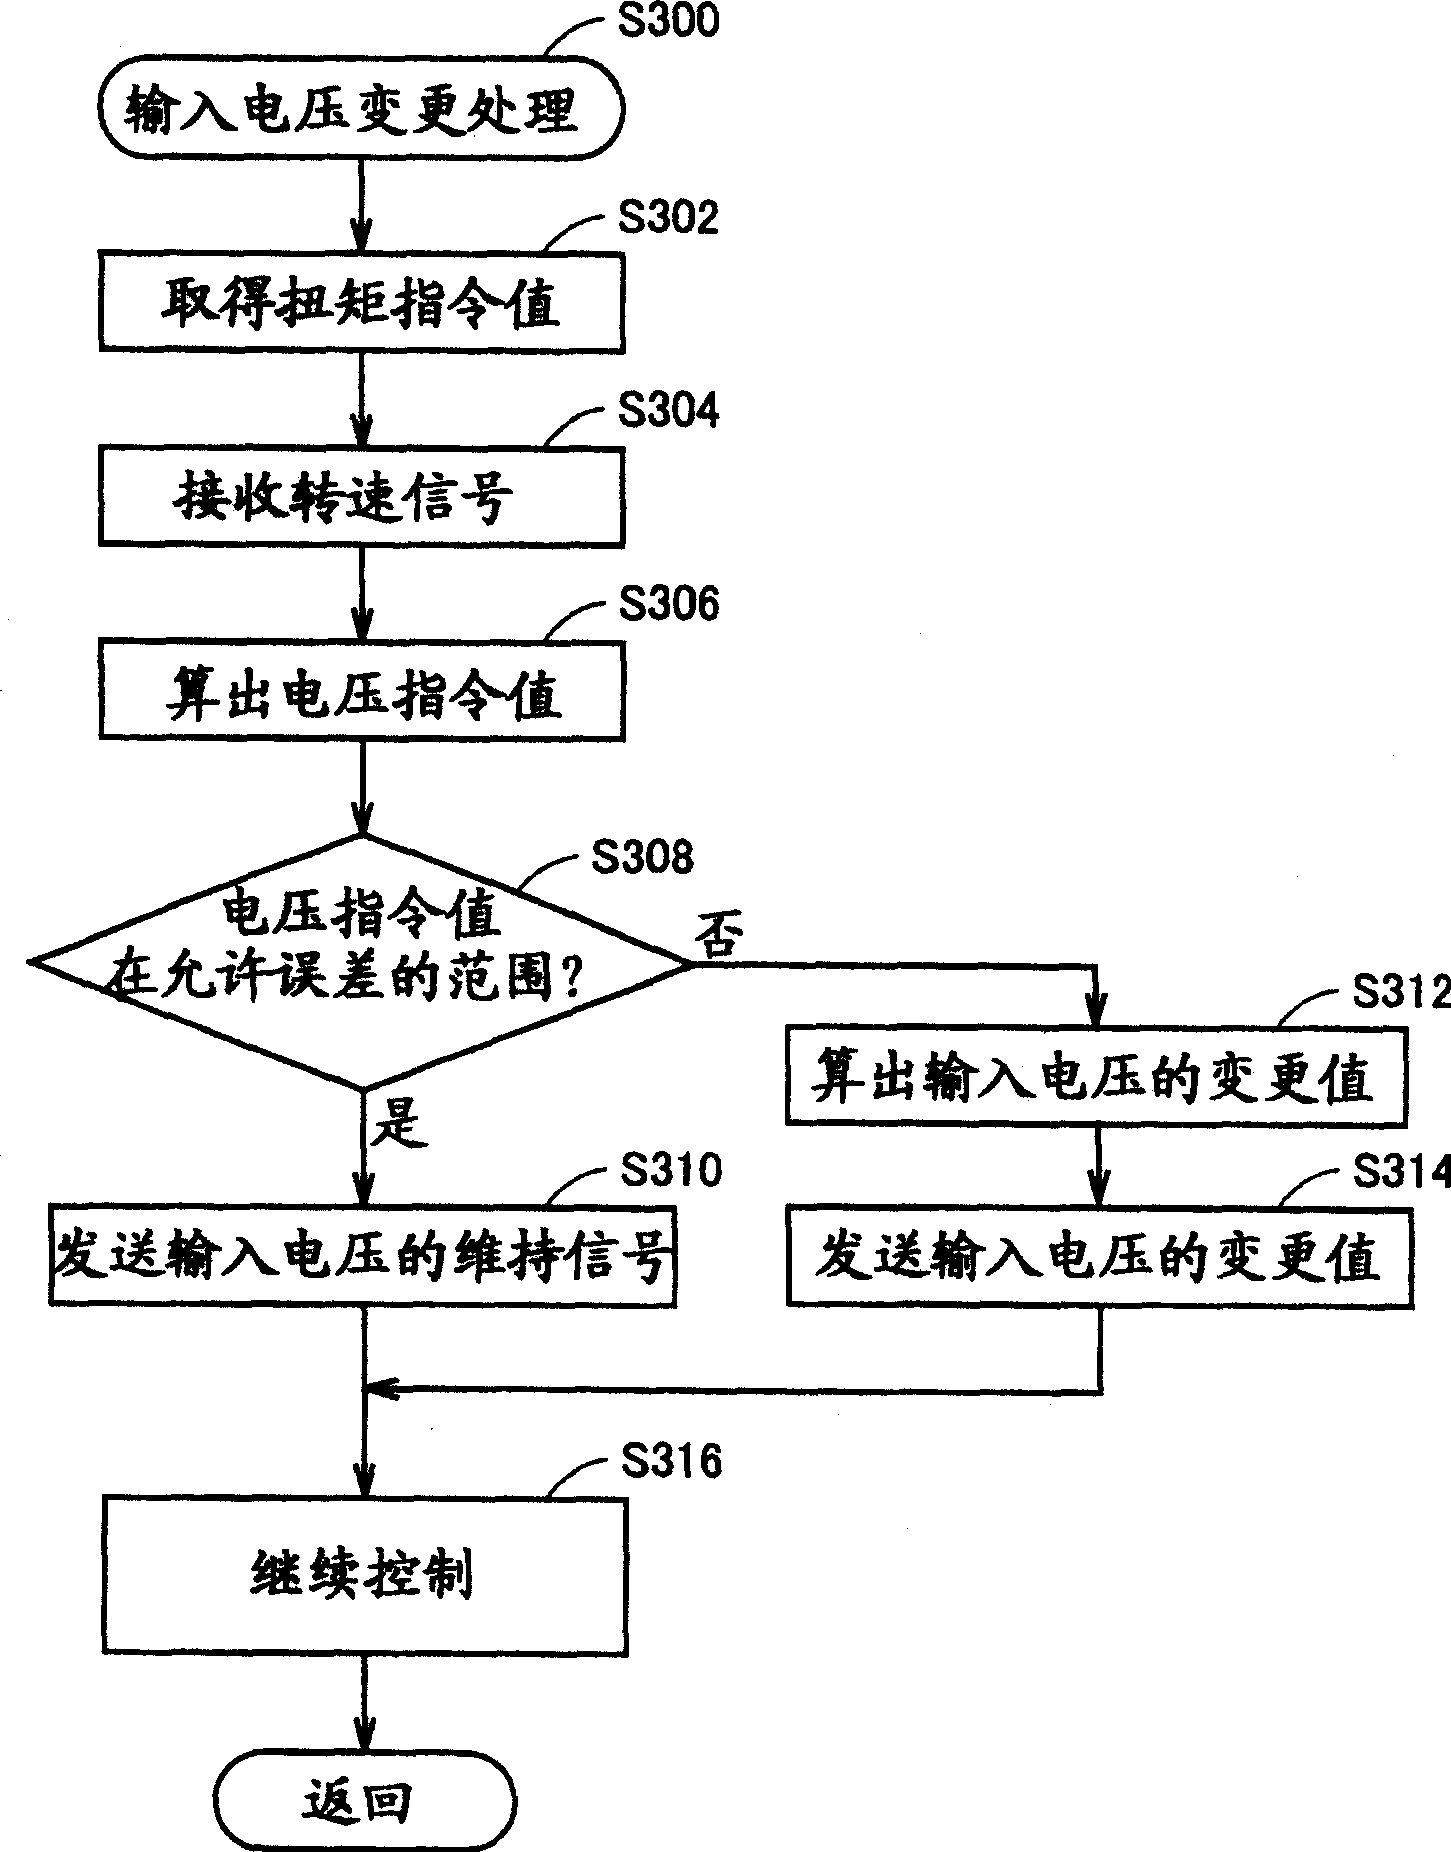 Motor system control device and control method